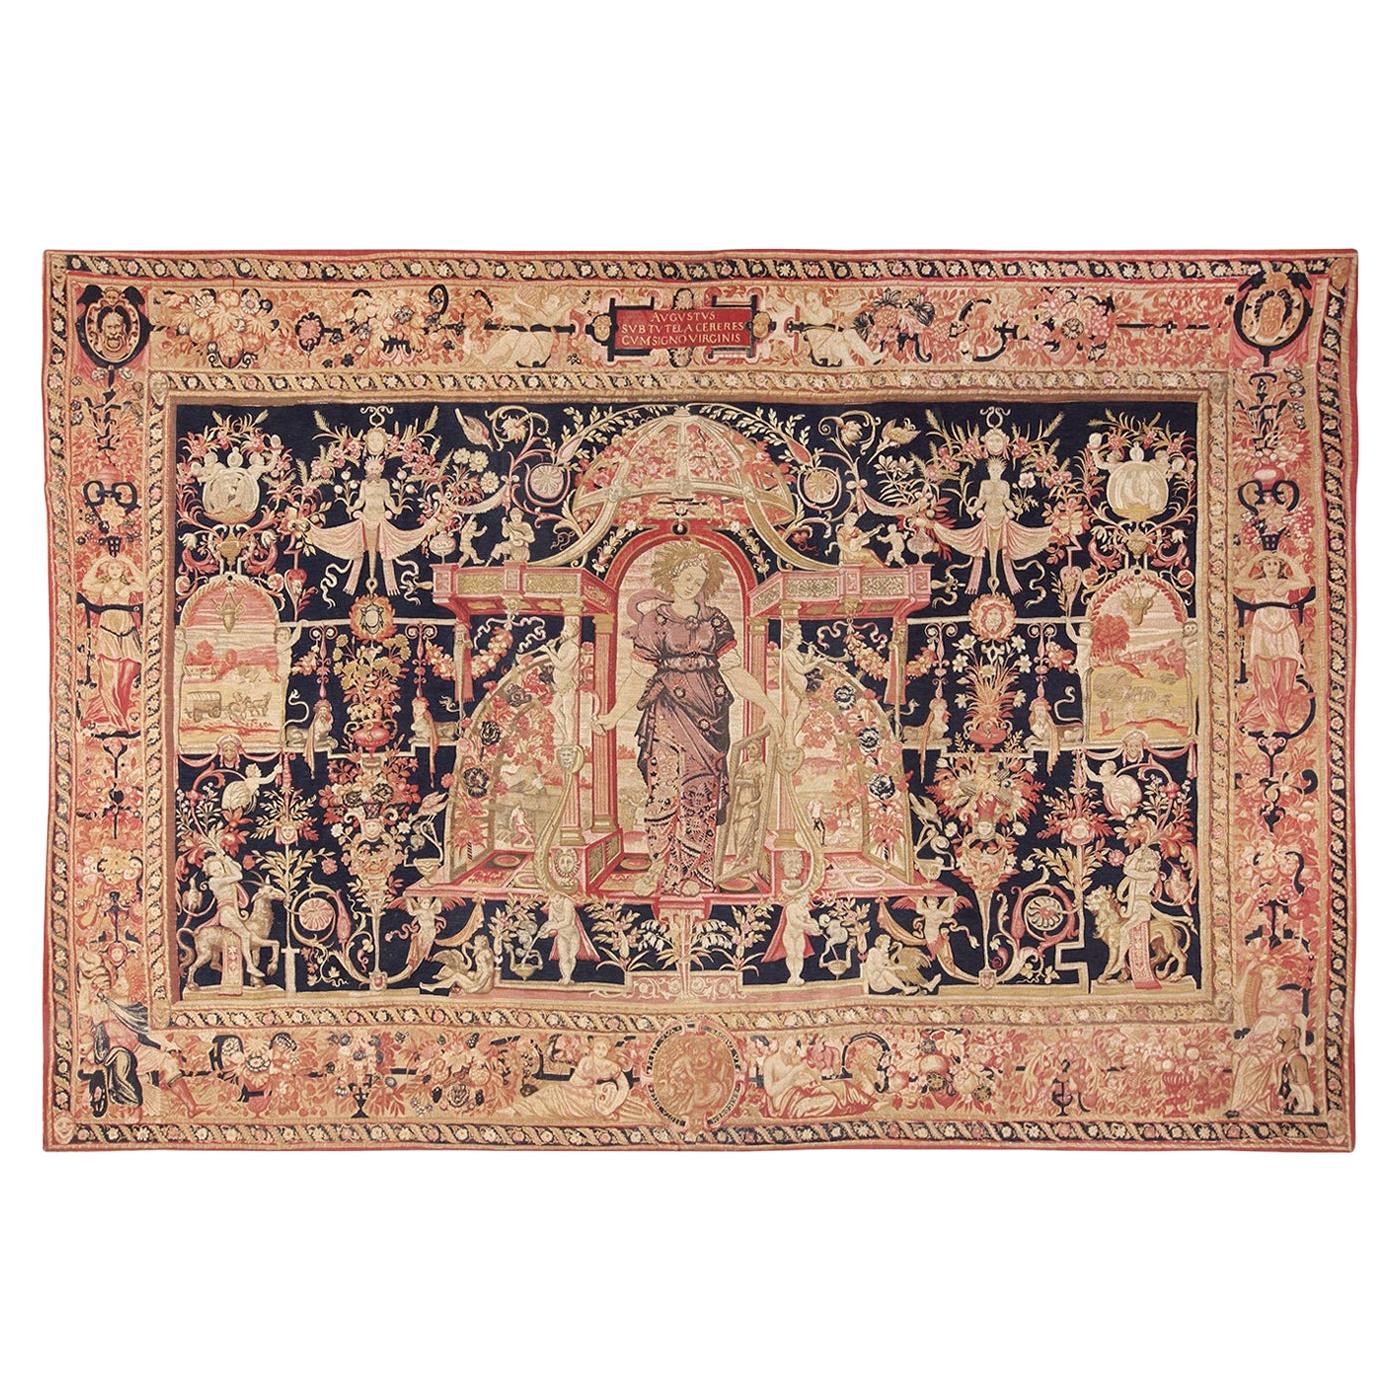 Nazmiyal Antique D'Art De Rambouillet Edition French Tapestry. 9' 9" x 13' 10"